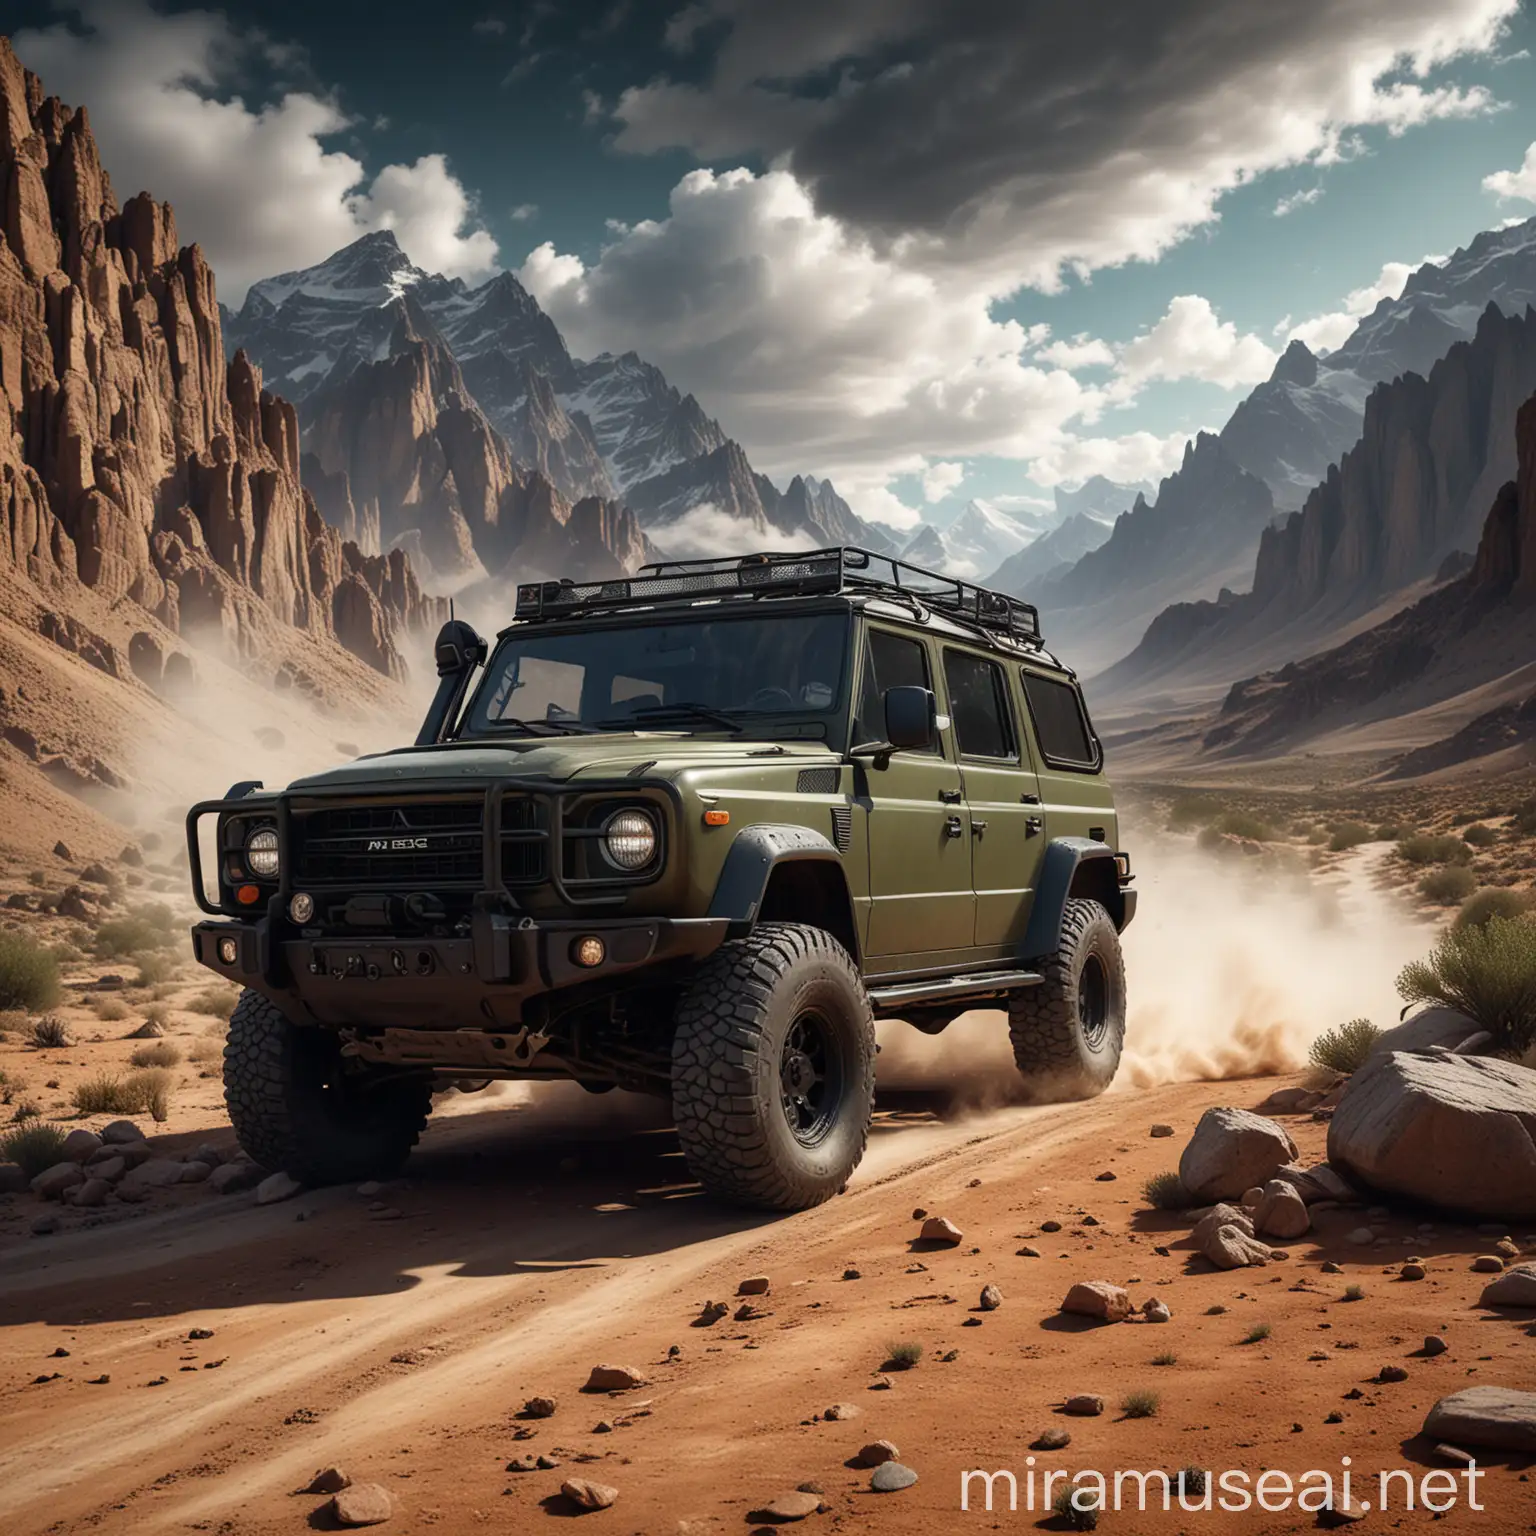 car Photography,A wild and atmospheric SUV off-road car, rugged and strong, body lines are rigid and smooth, equipped with large tires and high ground clearance, the front face is full of domenity, with metal protective bars and LED headlights. The vehicle color is dark, such as matte black or army green. The setting is set in the wilderness against a backdrop of rugged mountains and vast deserts, with thick clouds in the sky, creating an atmosphere of power and adventure ,ultra detail, hd, 8k, (photographic:1.5), magnificent, grandiose, mac os wallpaper, masterpieces, and stunning details, film photograhpy, vivid colors, sharp focus,ultra realistic illustration,hyperrealistic,best quality, high quality, masterpiece, ultra-detailed, highly detailed, 8k, pixabay 